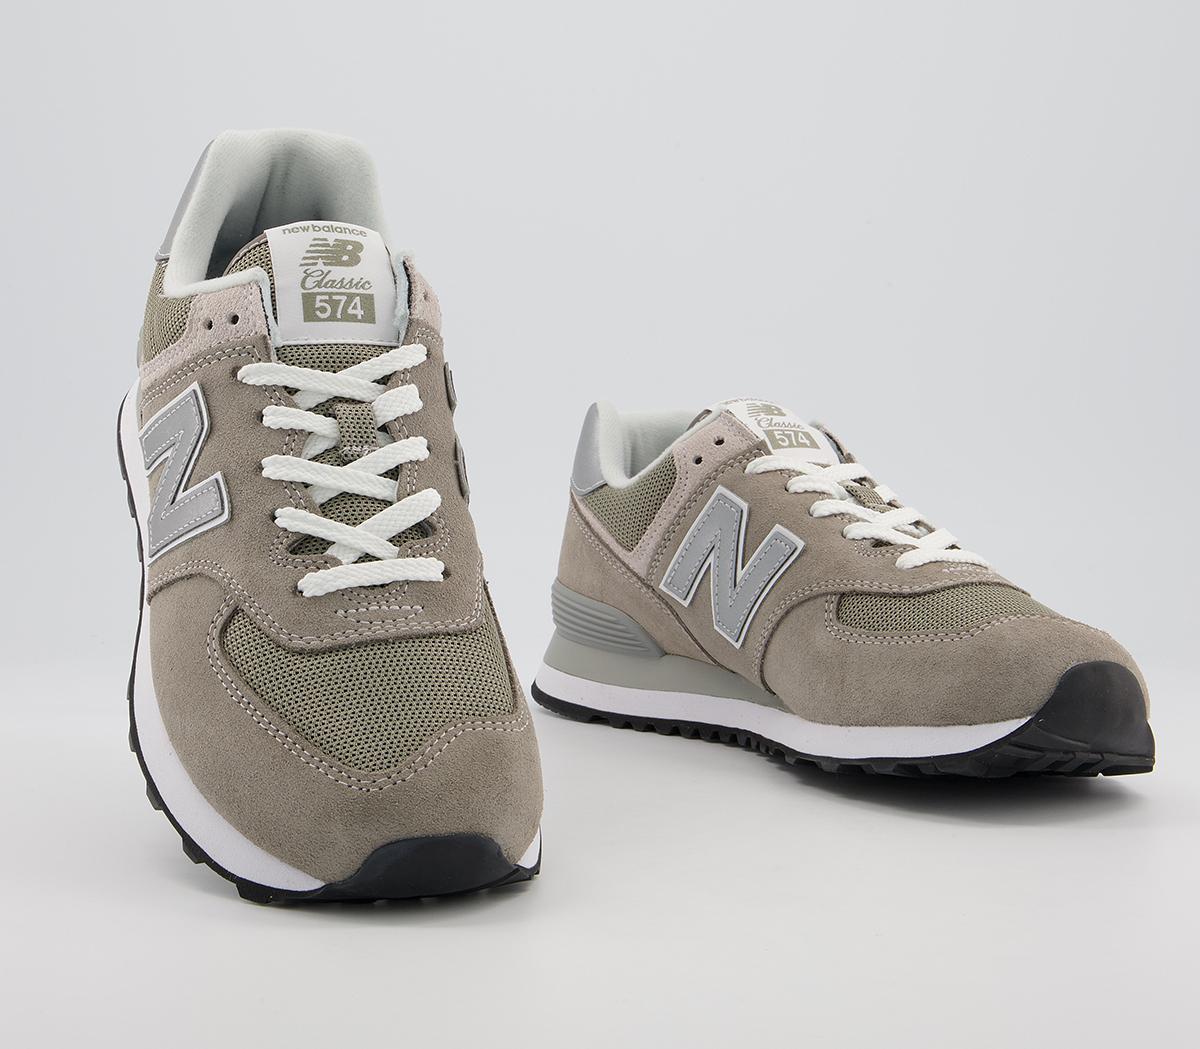 New Balance 574 Trainers Grey - His trainers